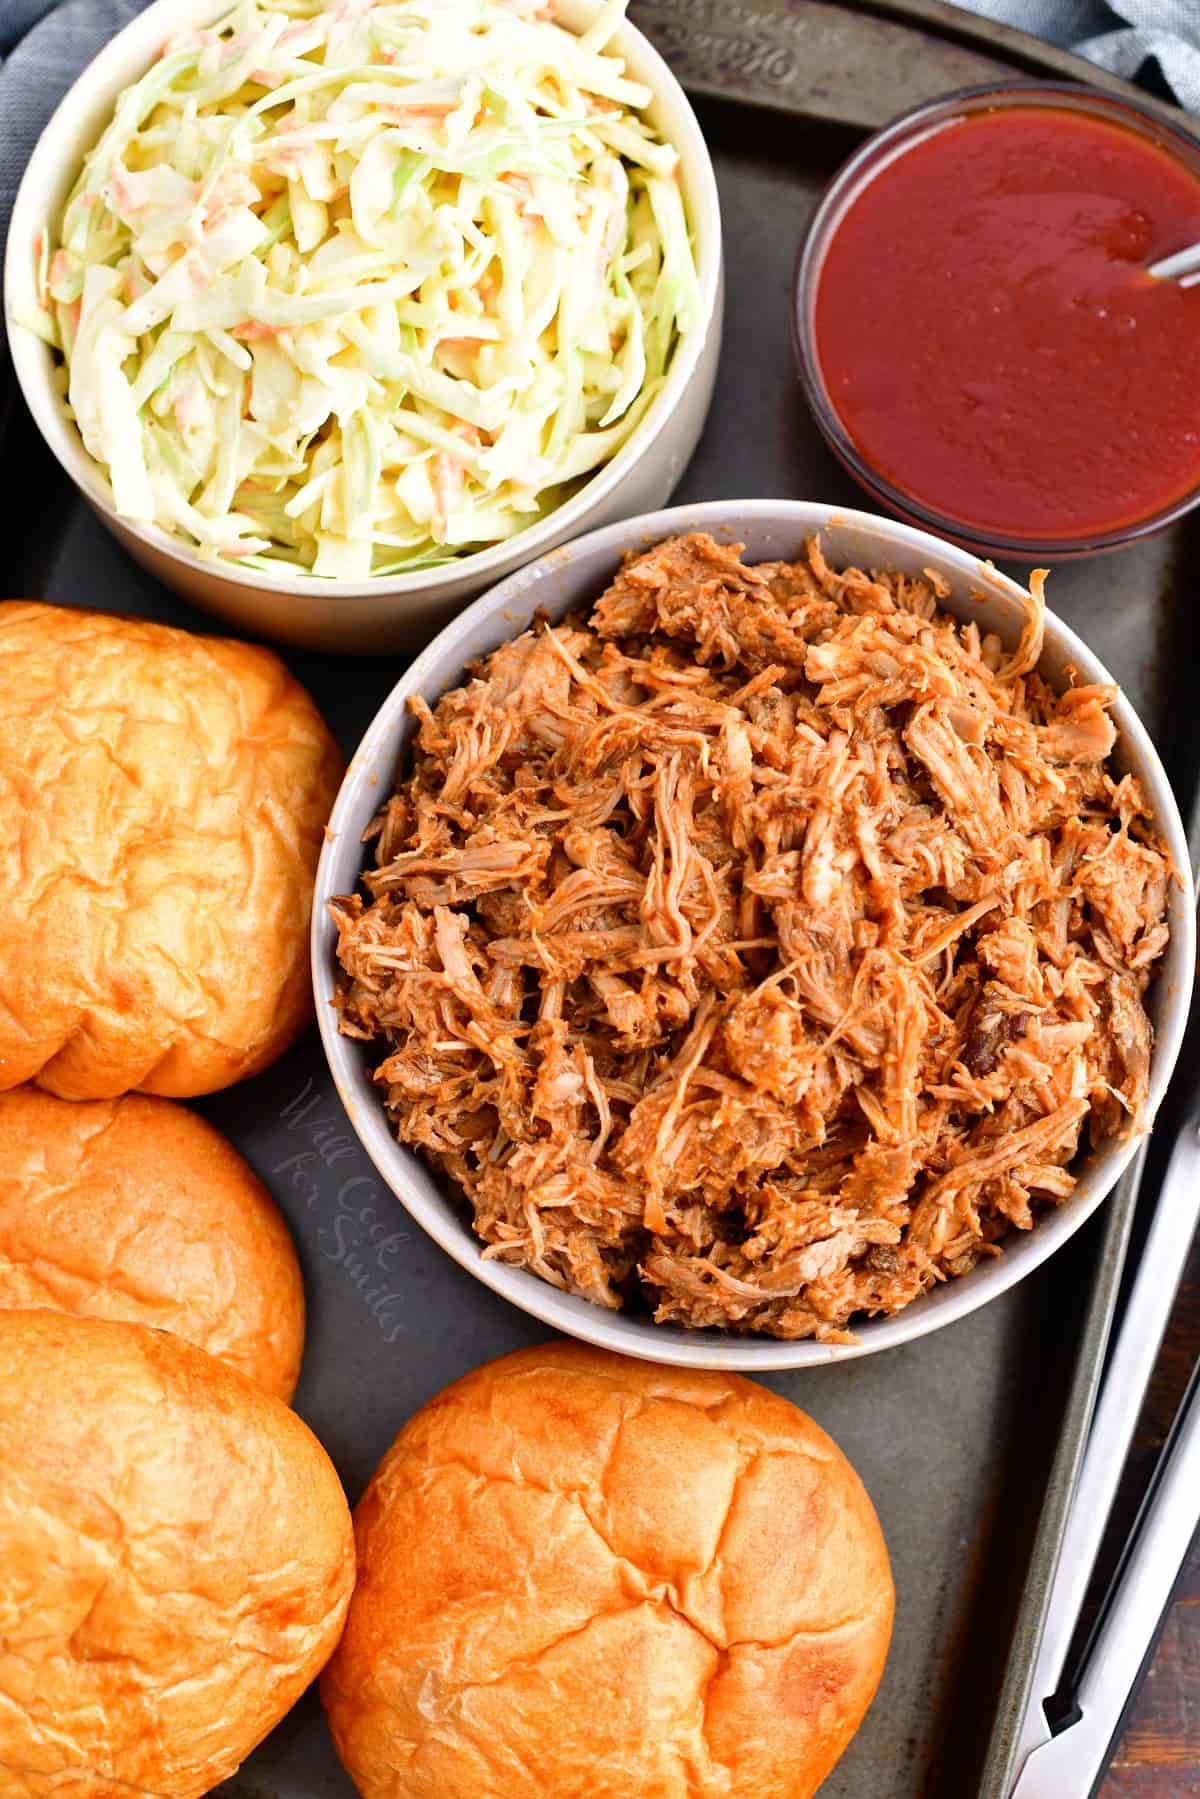 The ingredients for pulled pork sandwiches are presented on a metal surface. 